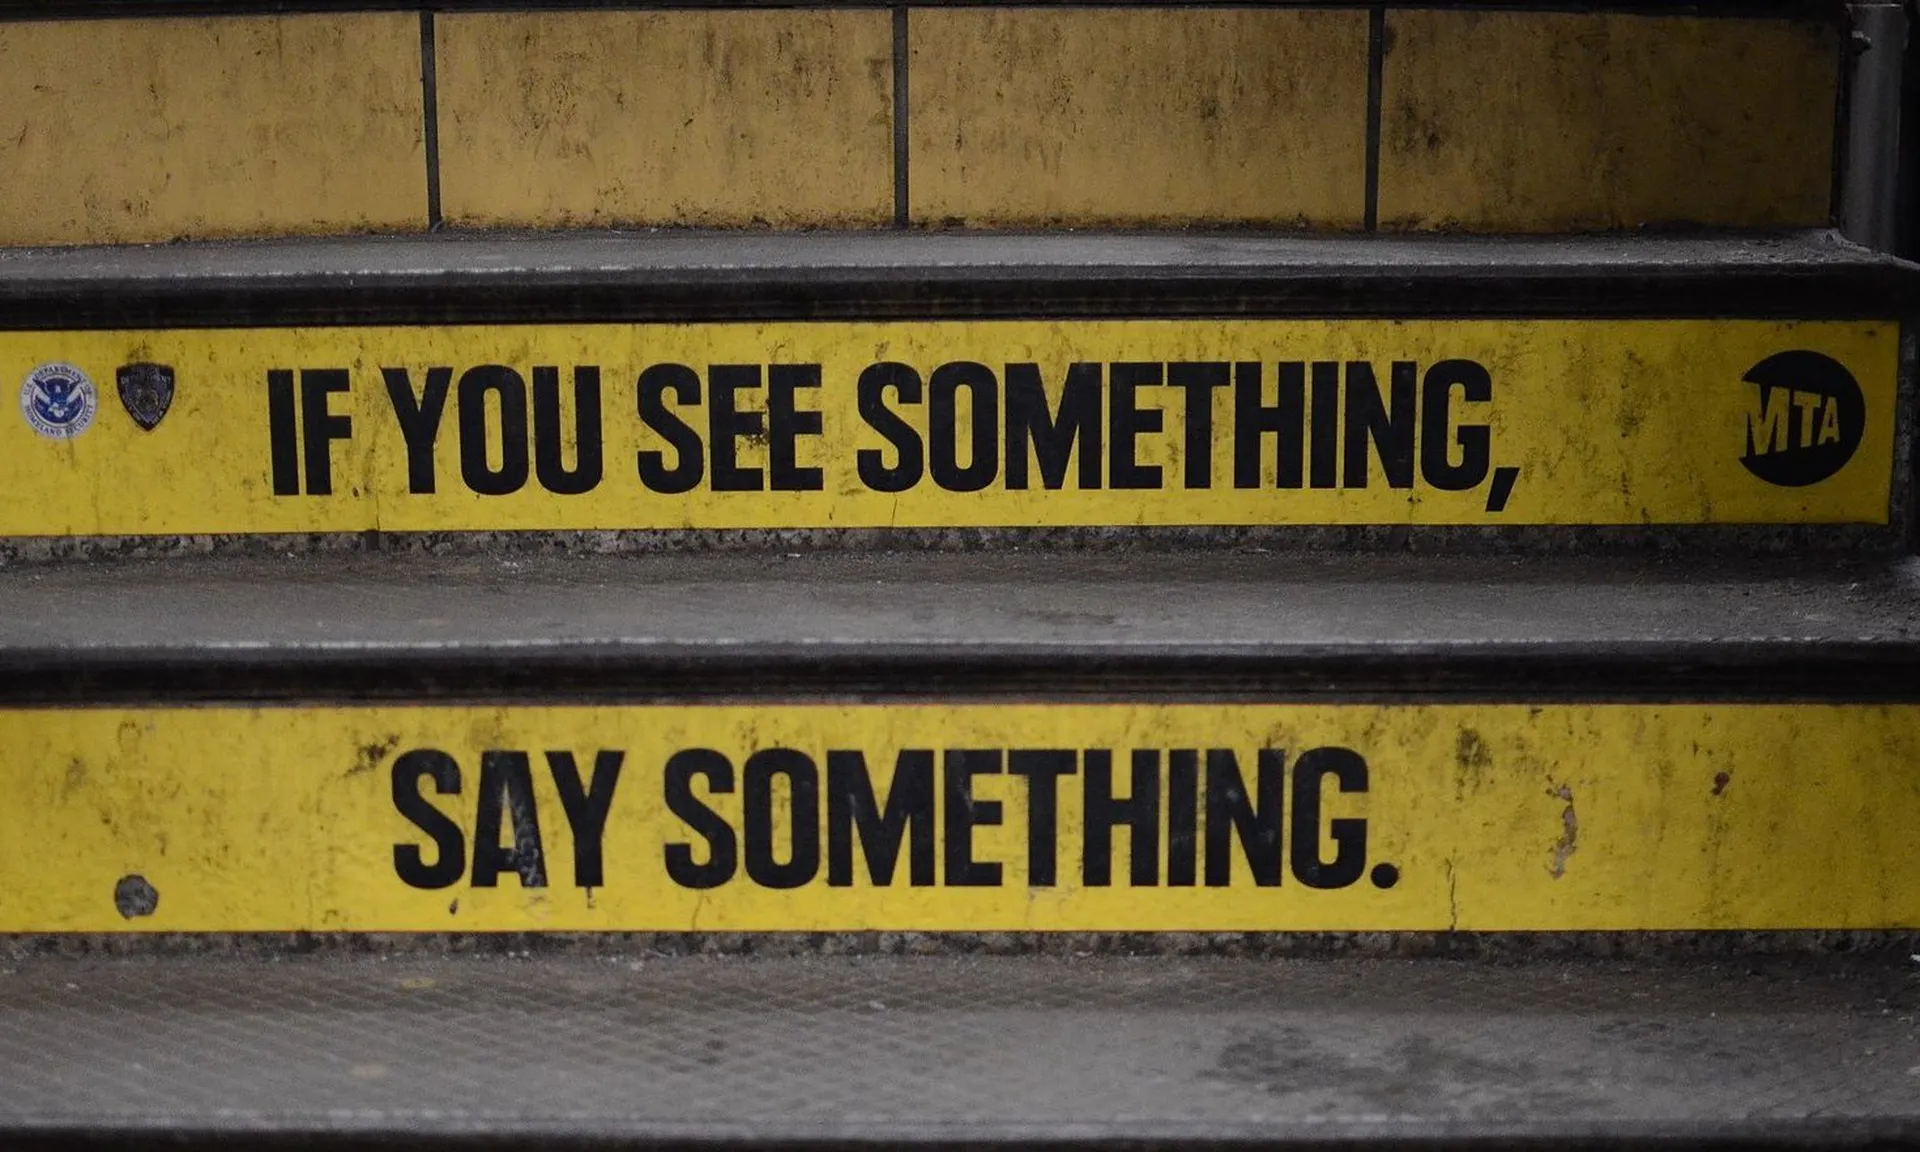 If you see something, say something, shown on the 42nd street subway. Experts are voicing the importance of creating a corporate culture that rewards cyber vigilance and removes the stigma of human error, which can sometimes silence those that recognize risks.(Credit: Steven Lek is licensed under https://creativecommons.org/licenses/by-sa/4.0/)